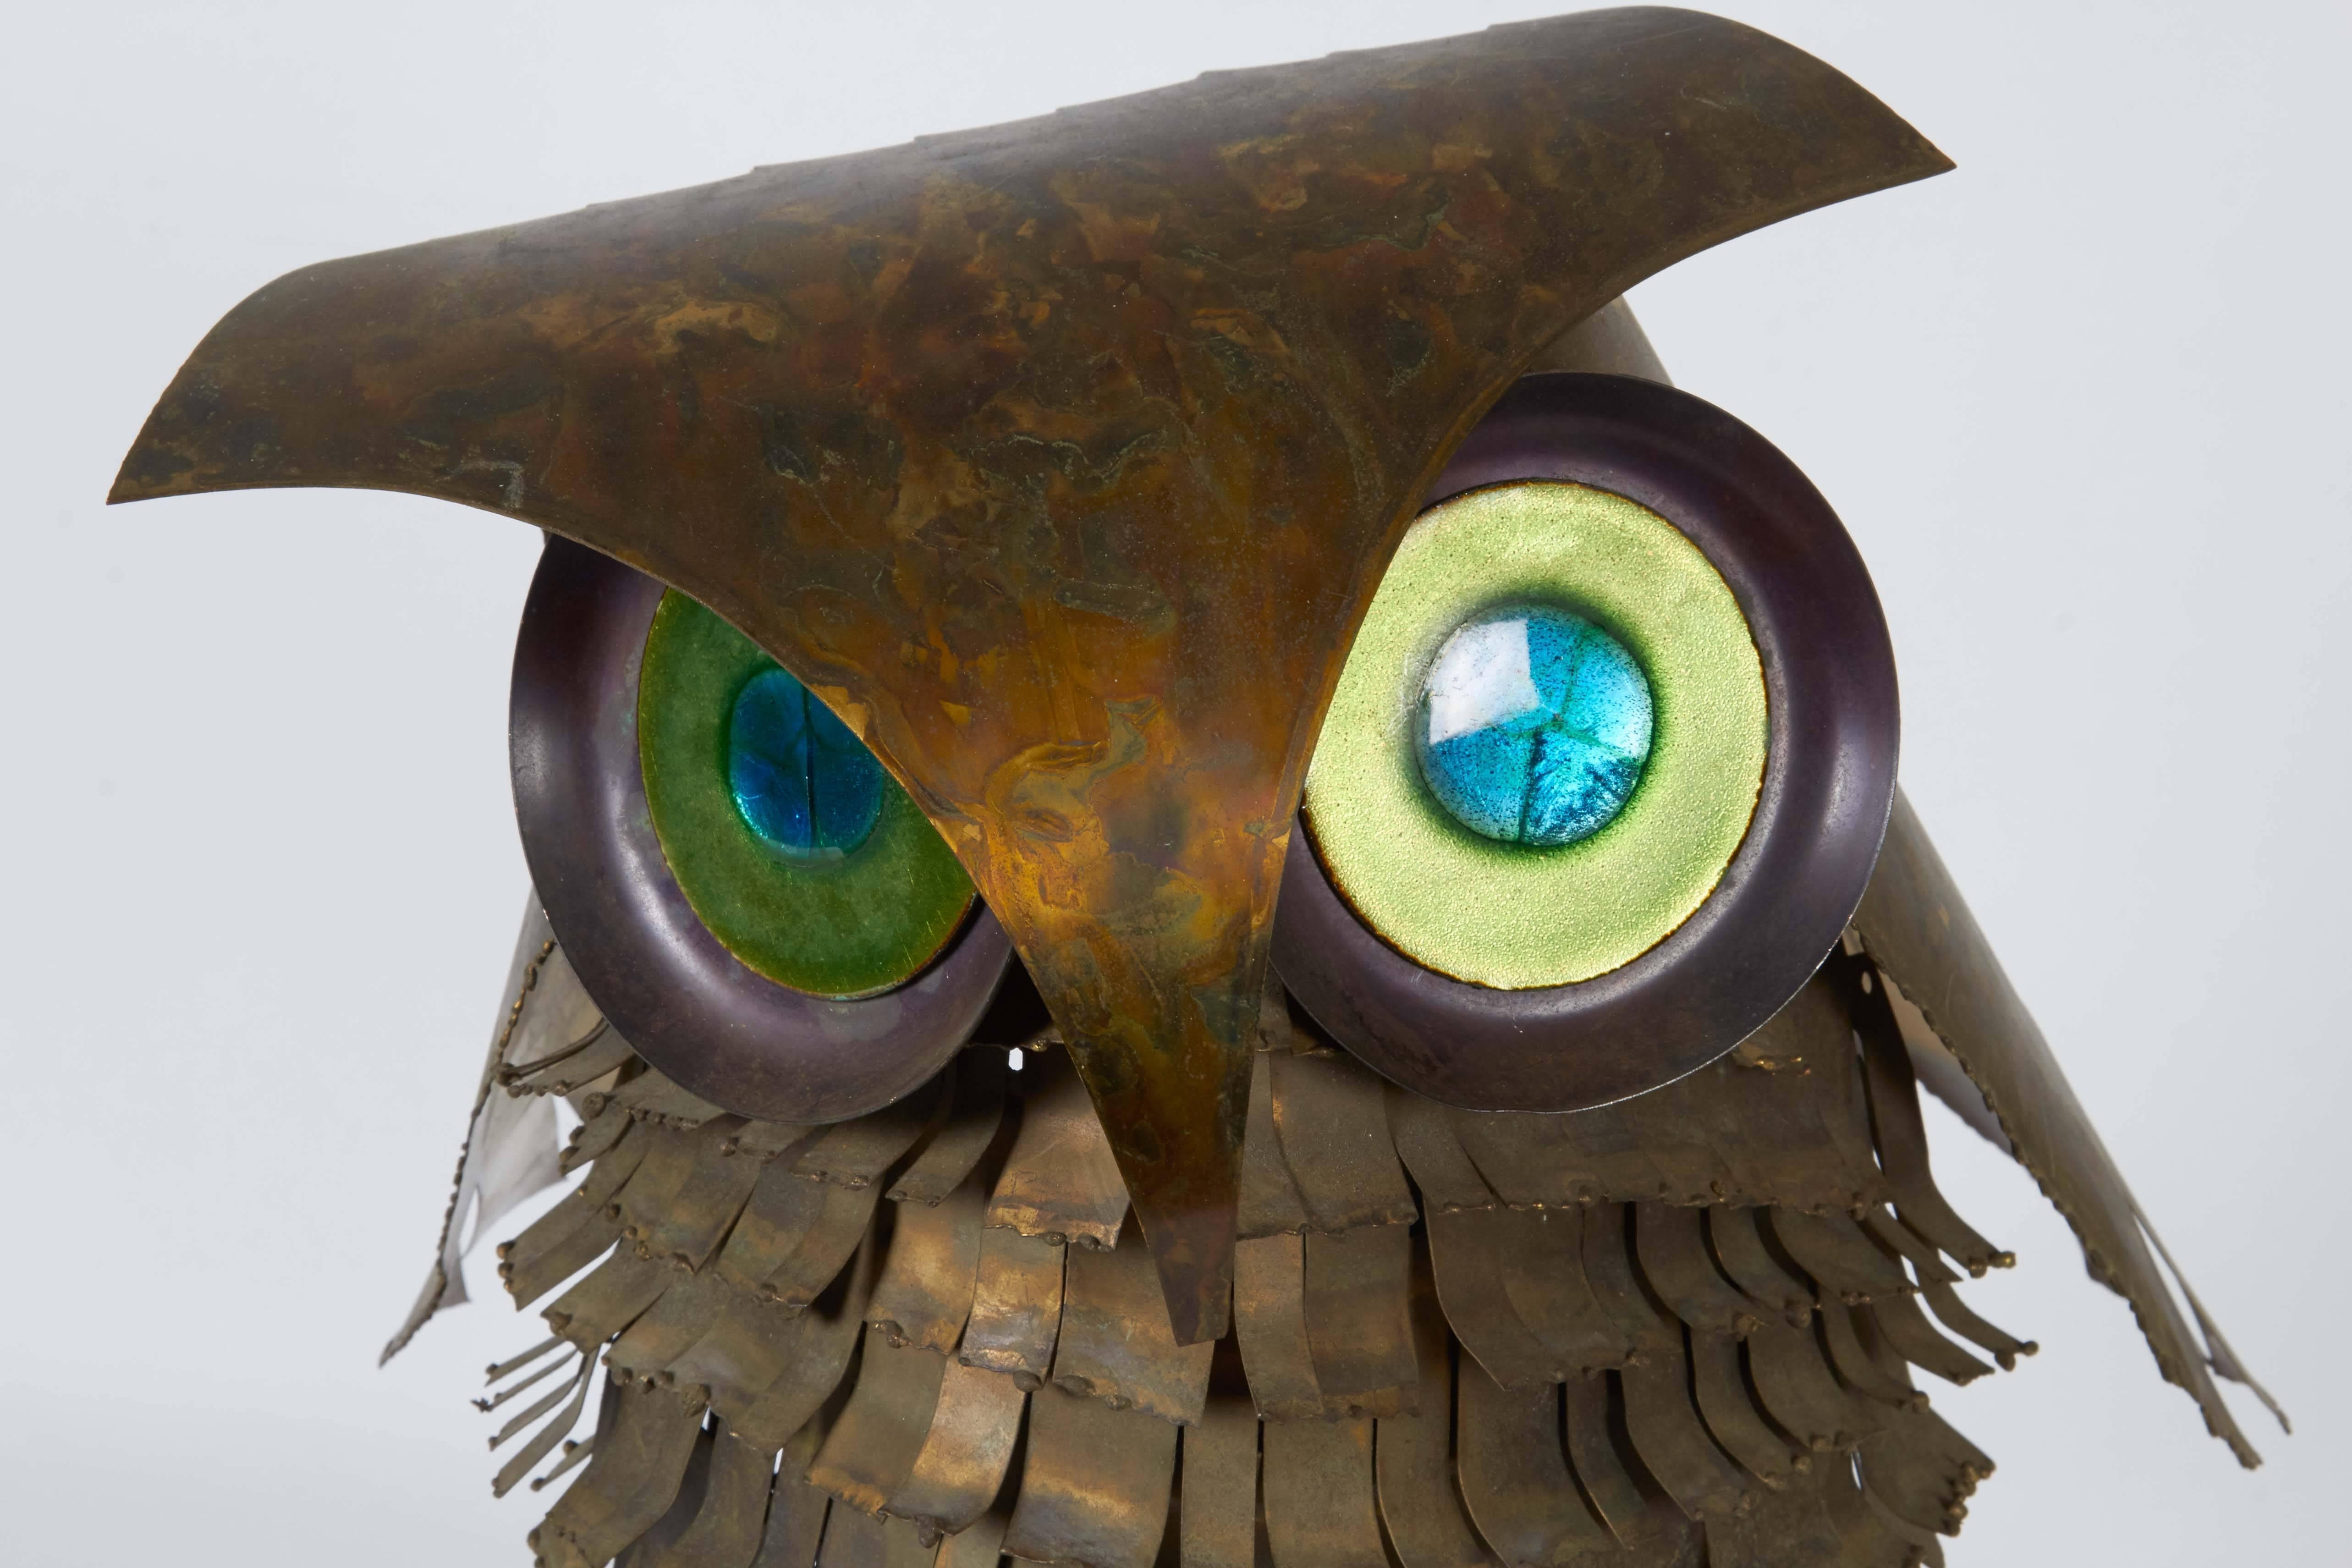 A Brutalist sculpture of an owl by Curtis Jere, produced 1968, with stylized feathers and crest crafted of patinated metals, mounted on a black lacquered wood base. Markings include signature and date ['68] to a small plaque to base. Very good